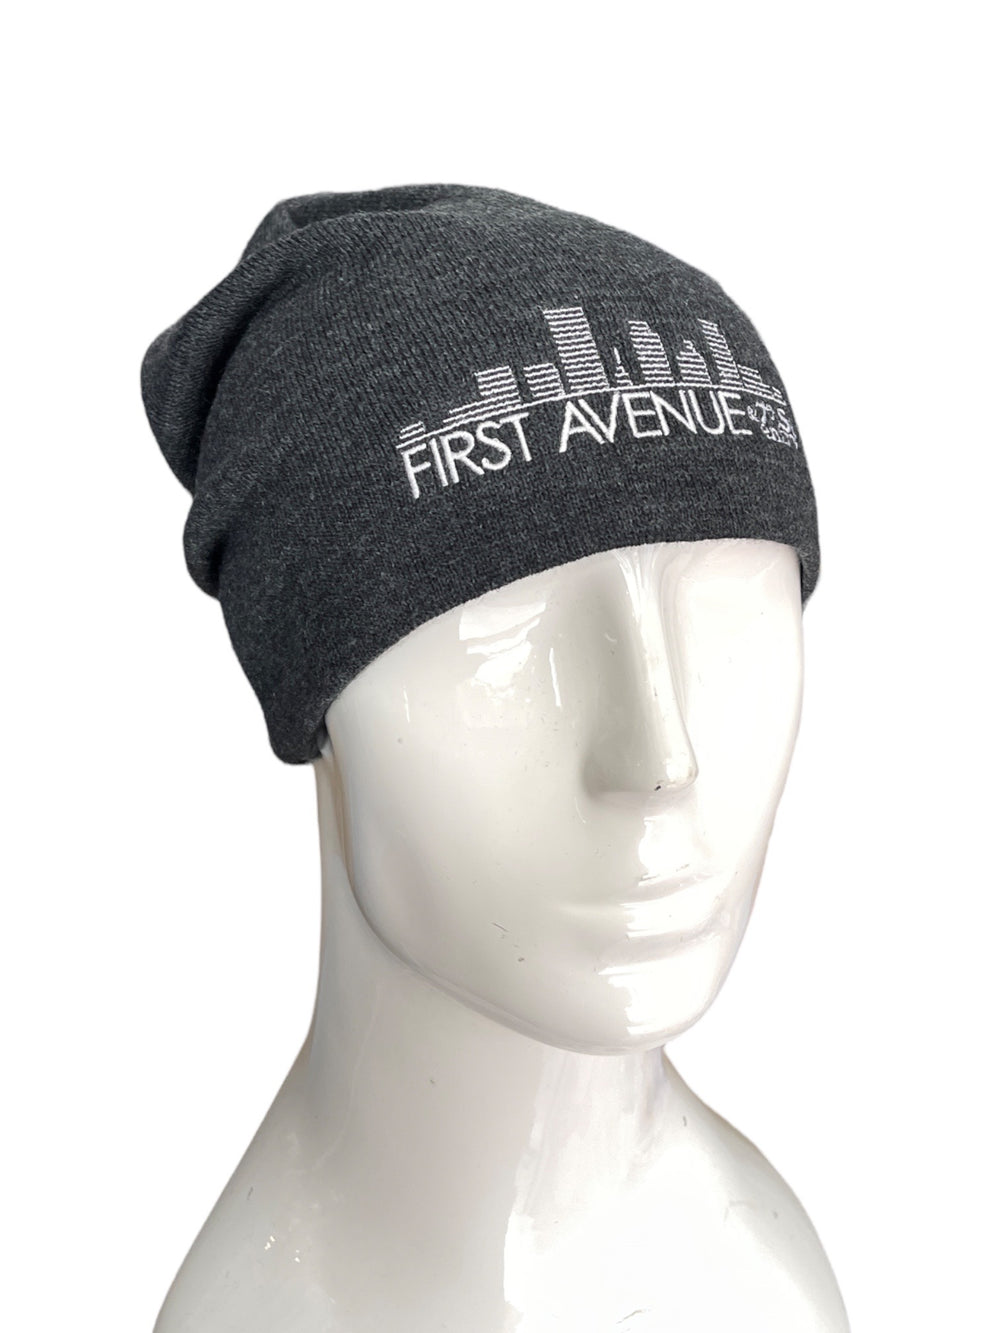 Prince – First Avenue Skyline Embroidery Official Slouch Beanie Hat NEW